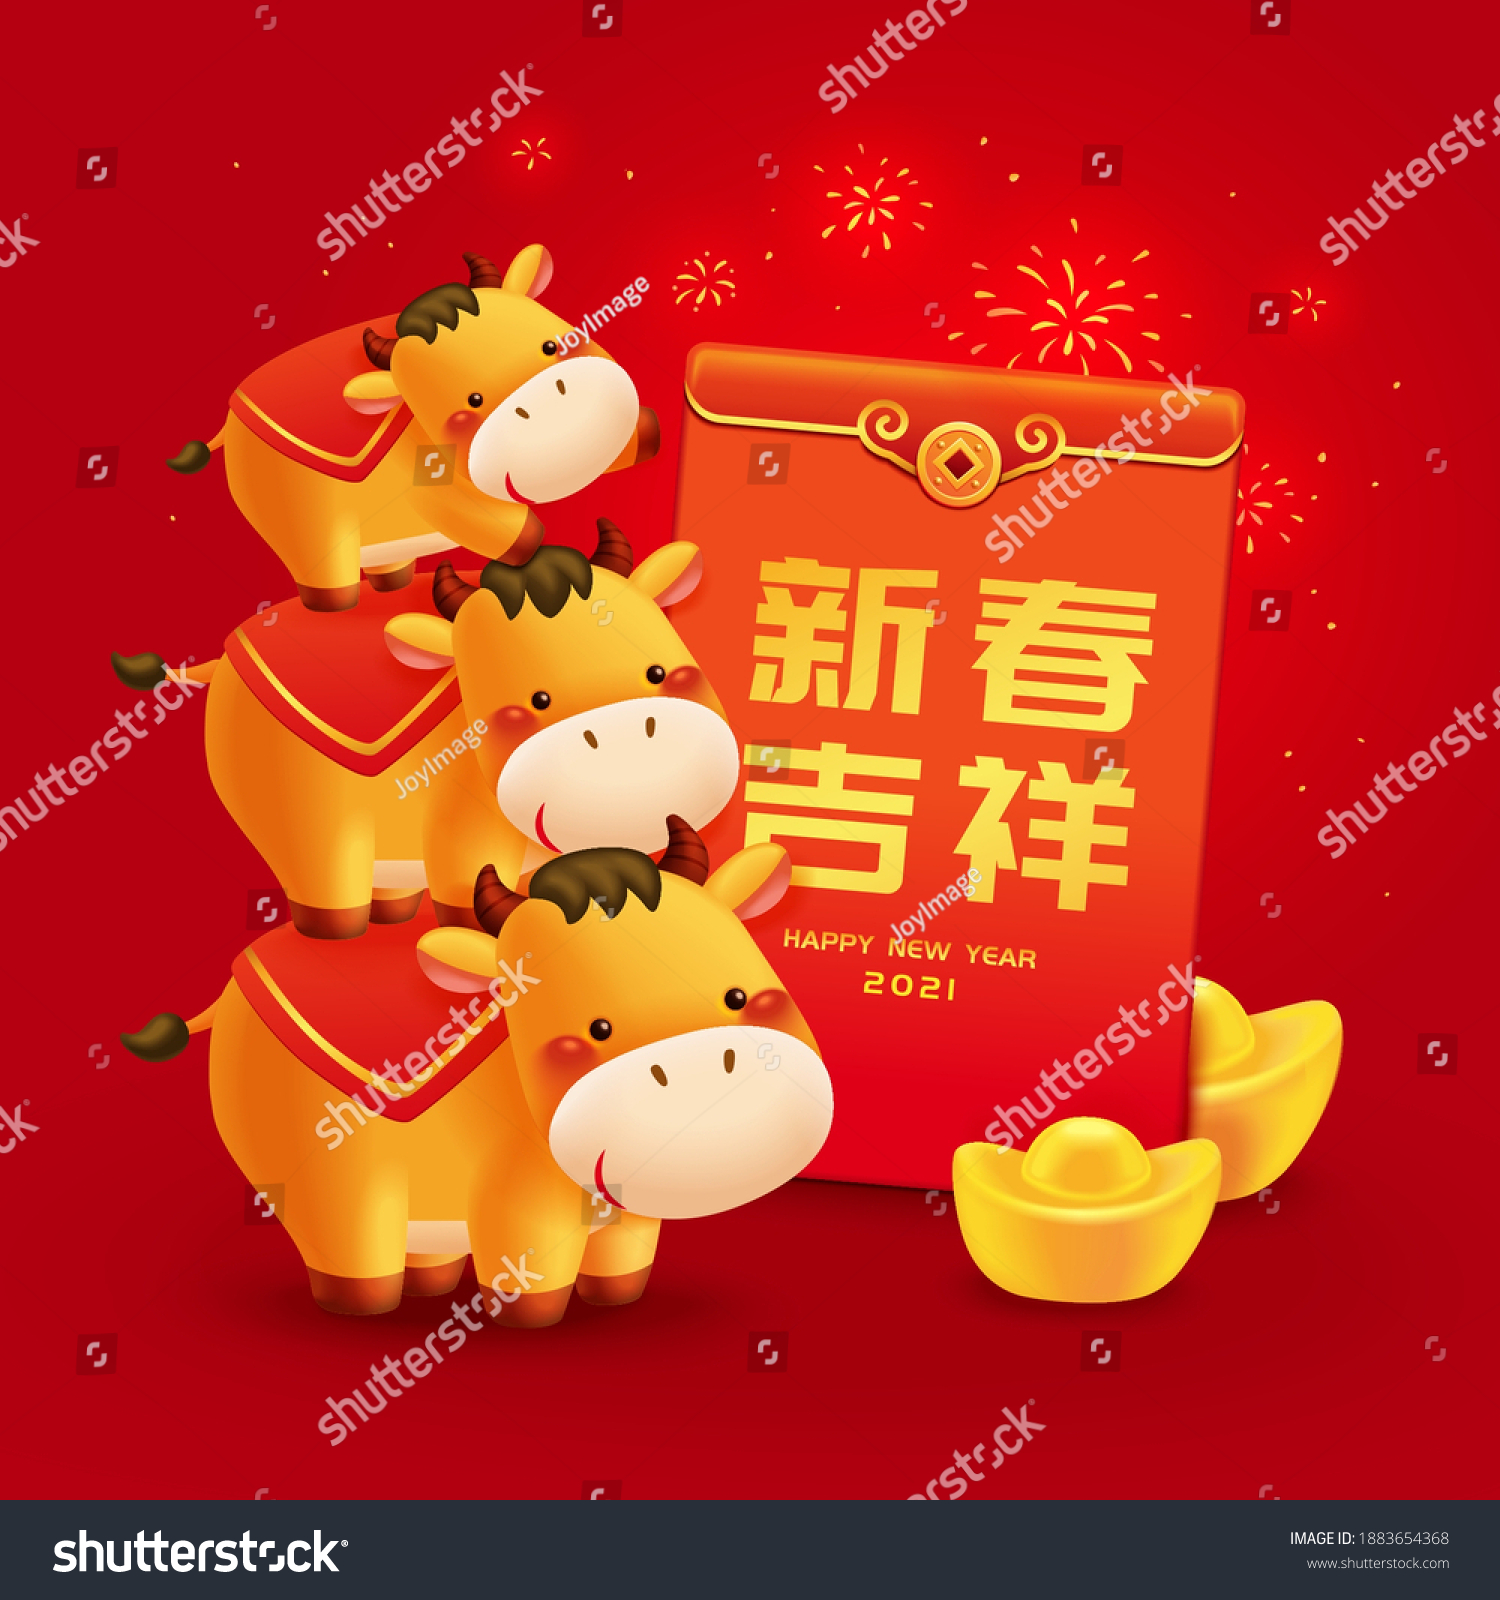 Lovely stacked cows with giant red envelope and gold ingot over red background, Chinese translation: Happy lunar year #1883654368